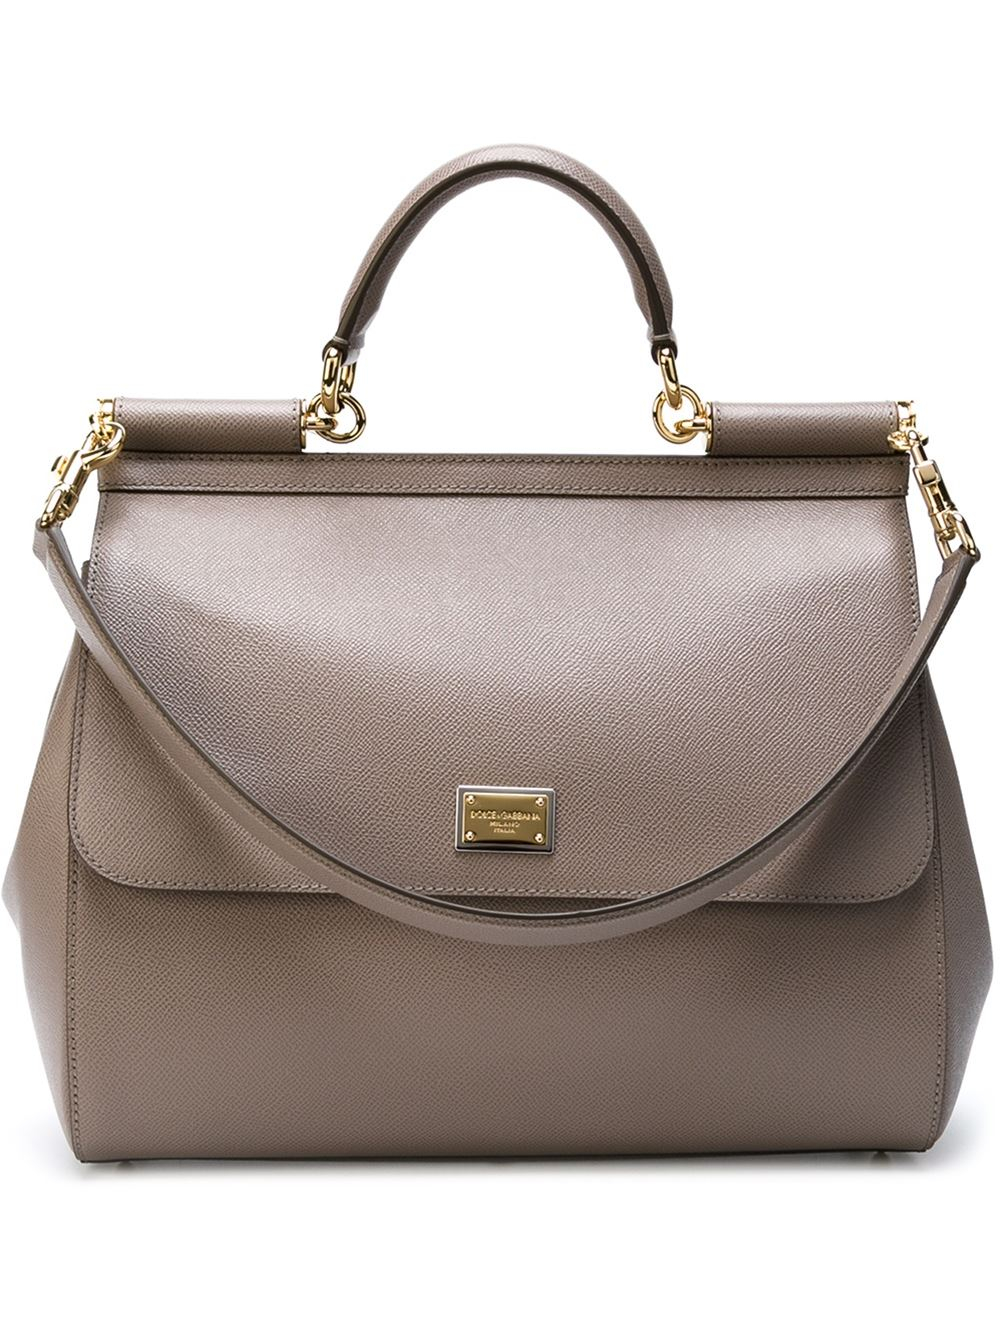 Dolce & Gabbana Large 'Sicily' Tote in Grey (Gray) - Lyst